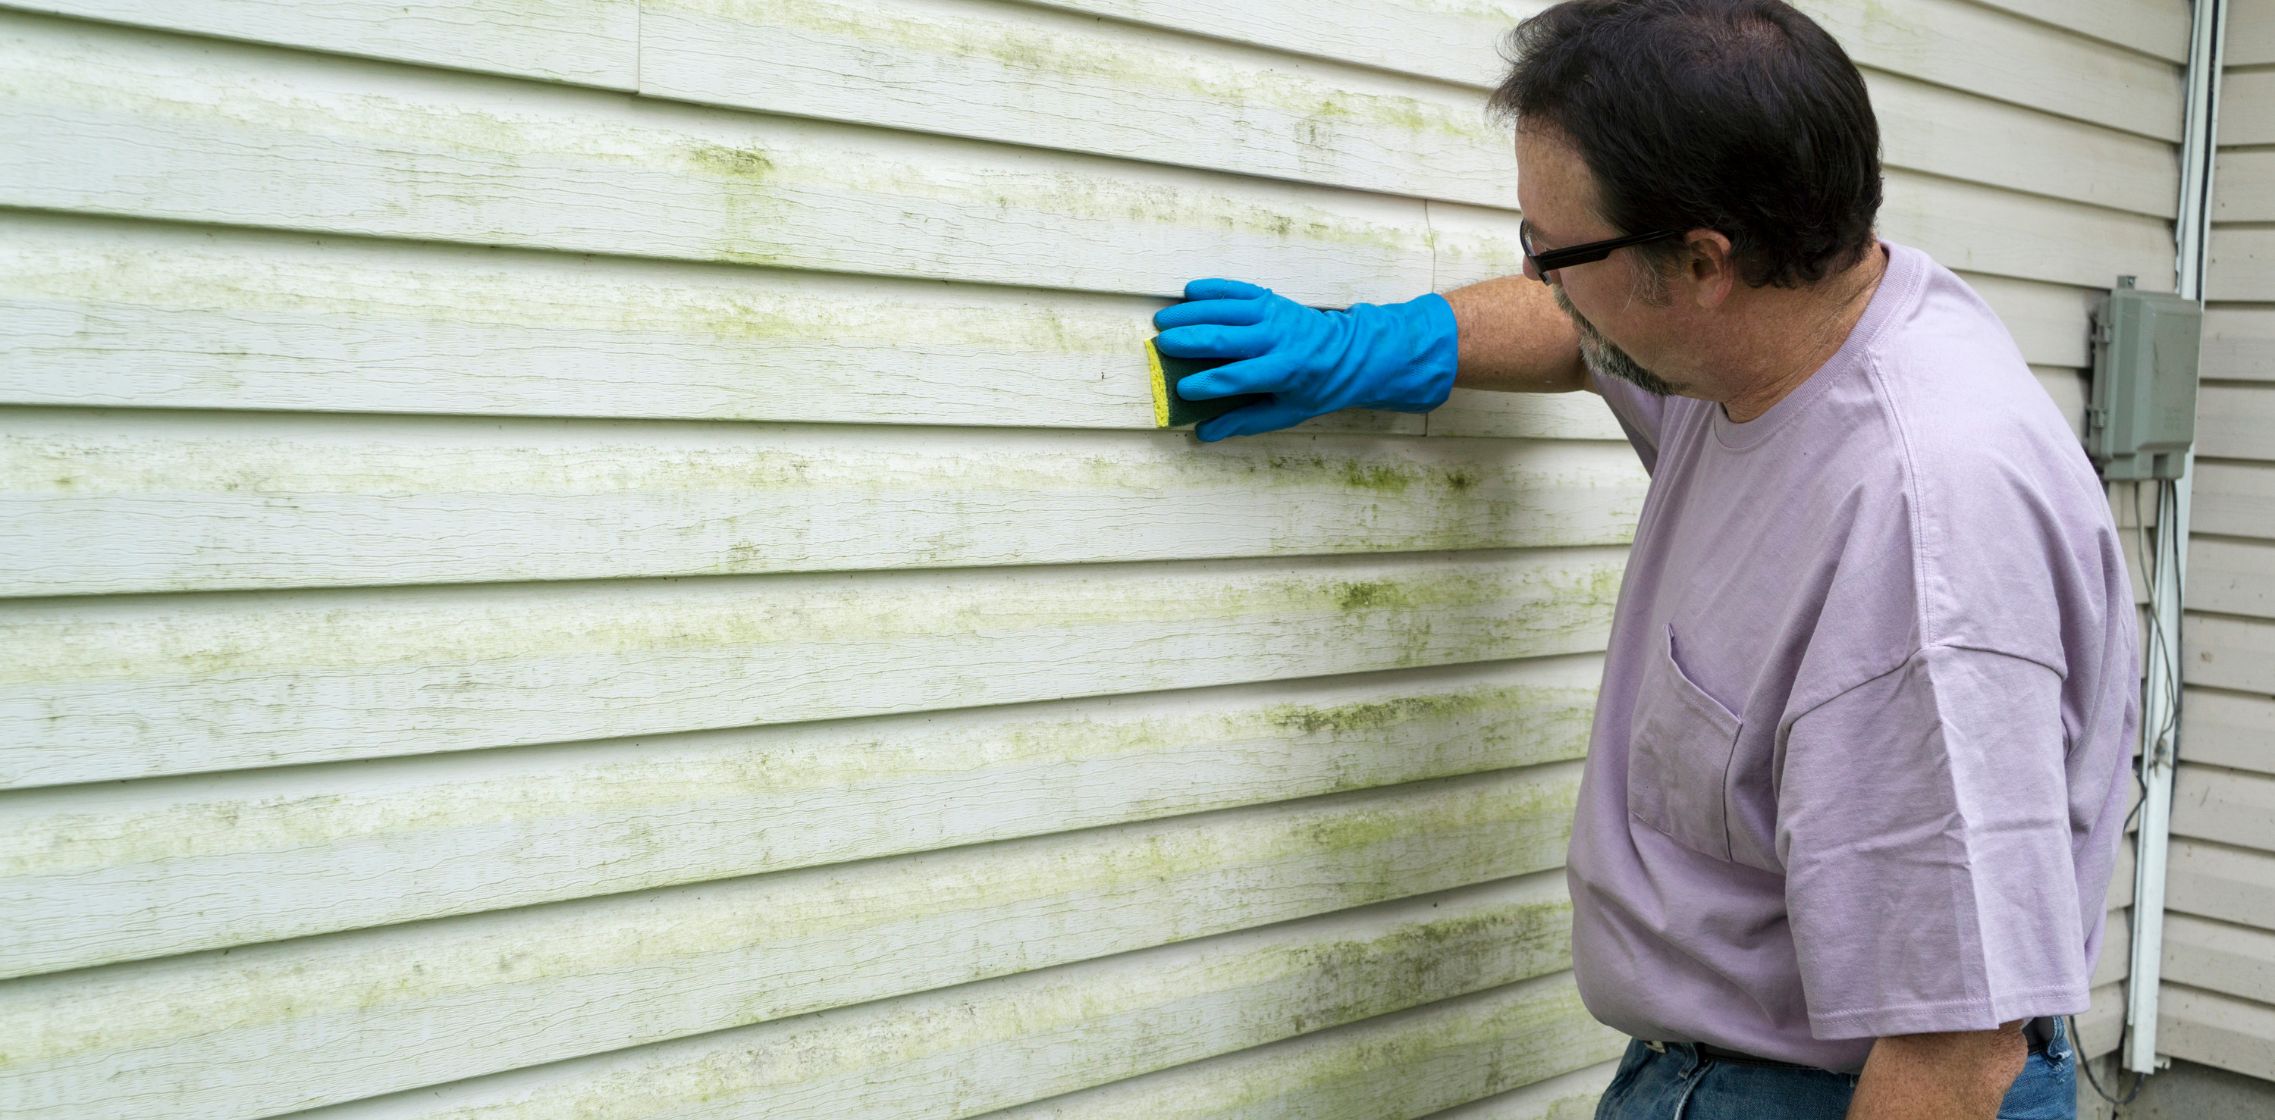 Removing Wood Siding With Lead Paint